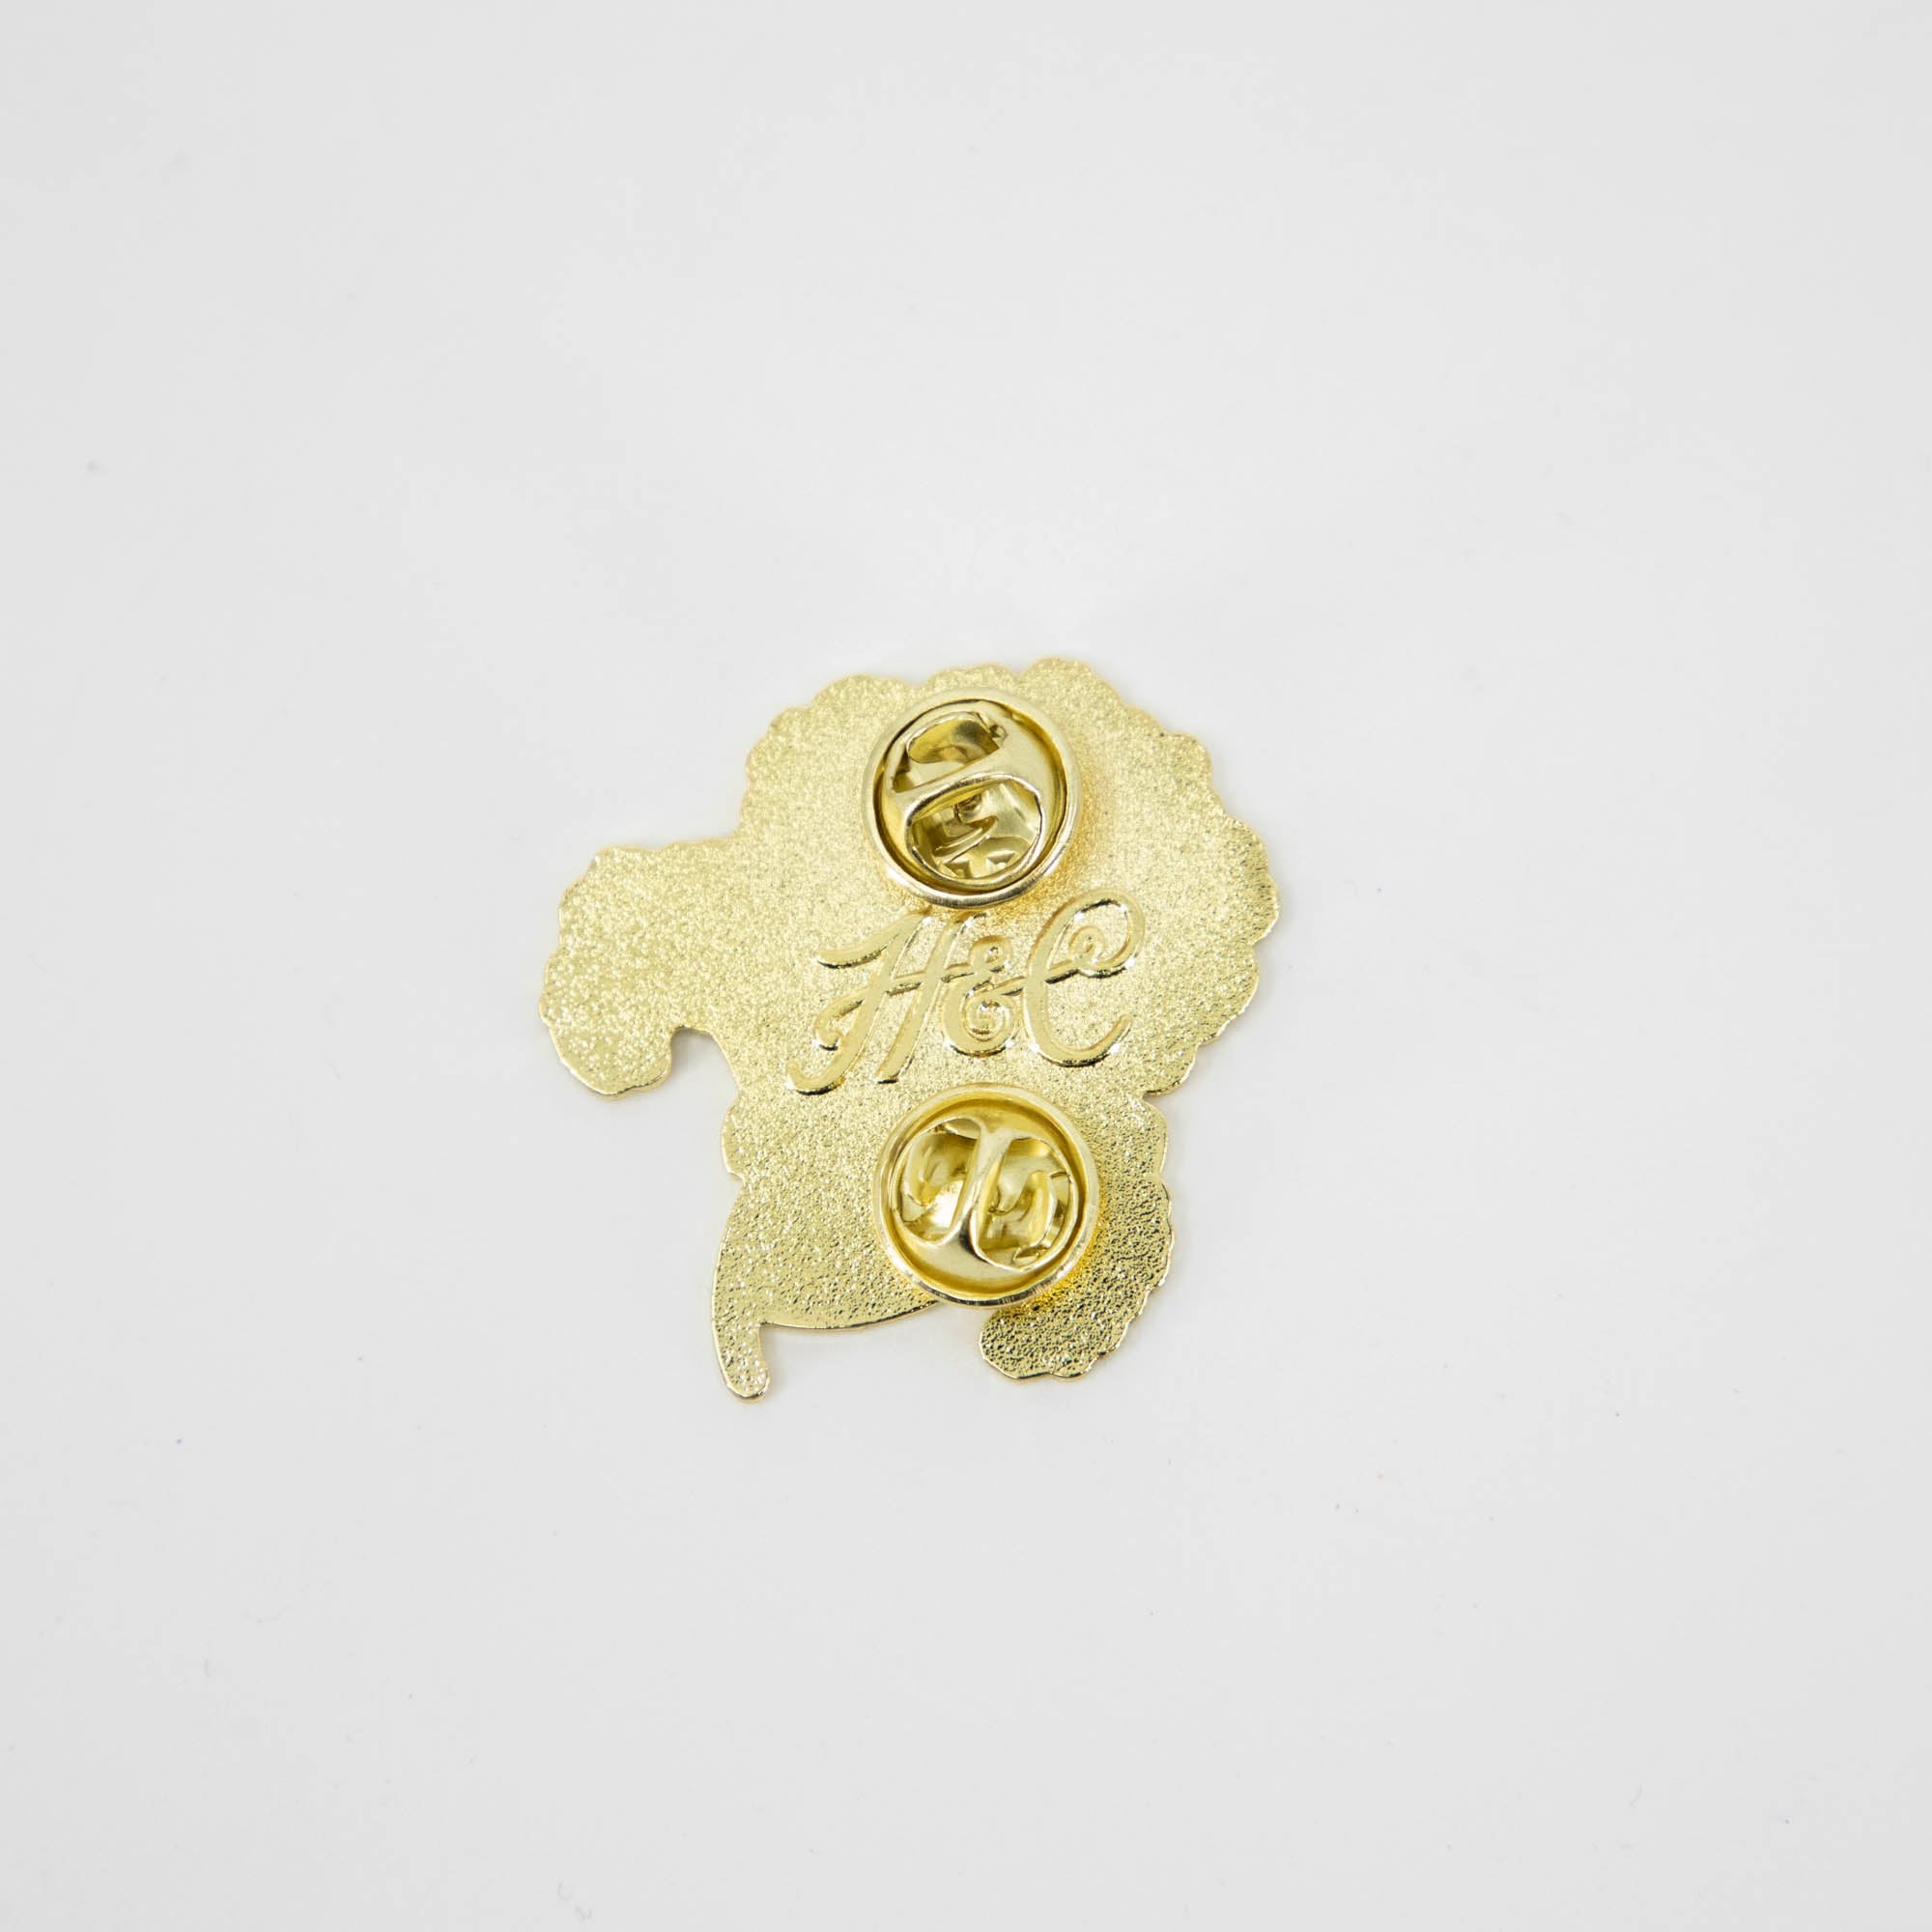 A Geranium Enamel Pin from Hester &amp; Cook featuring a stylized gold poodle.